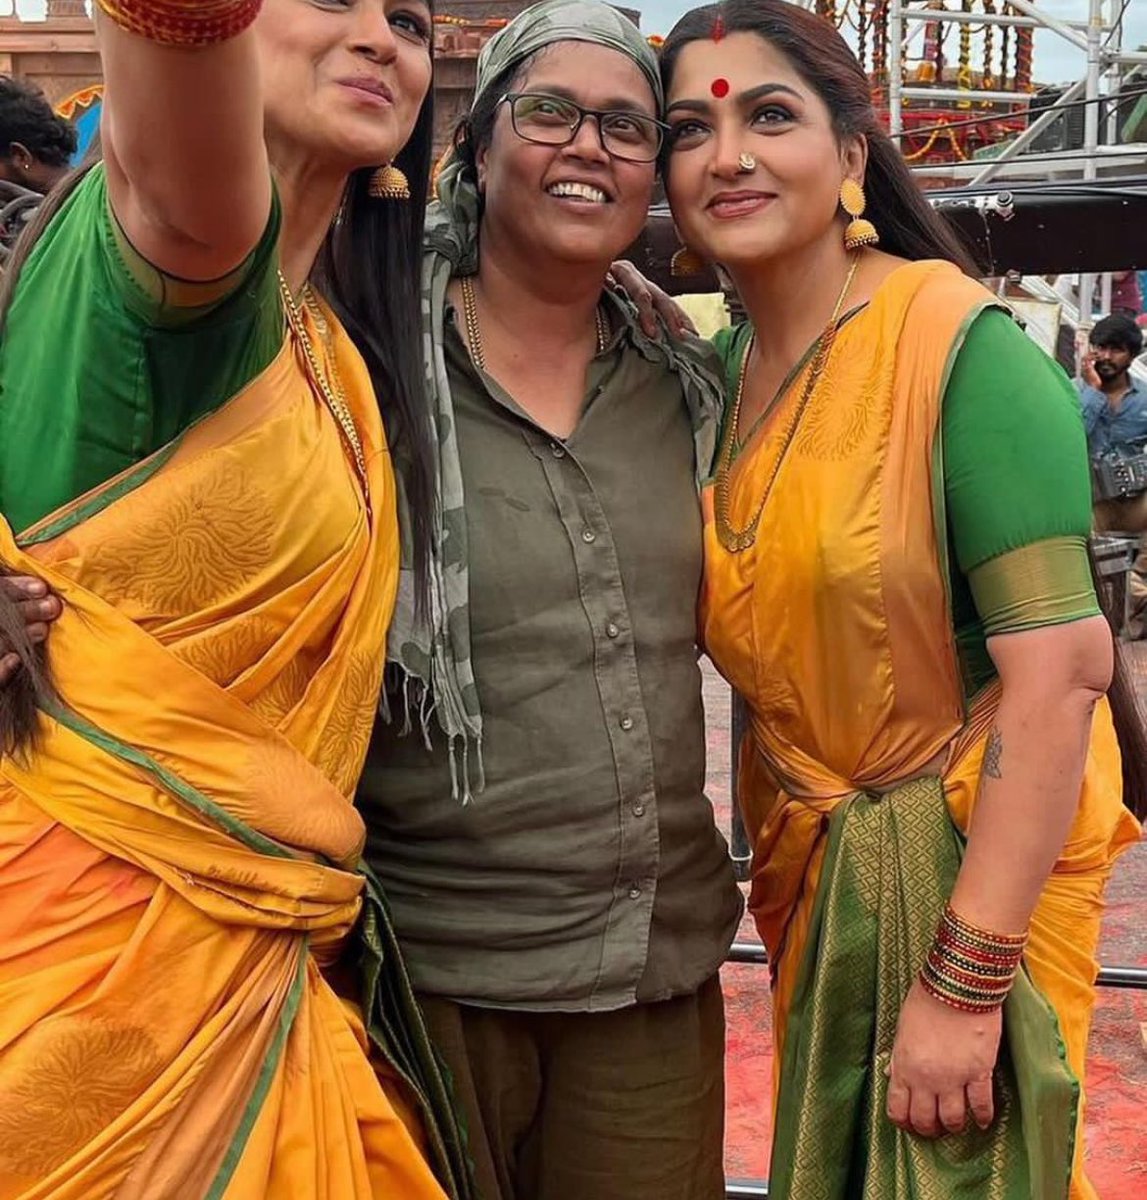 #Aranmanai4 worked big time due to the pre-climax cameo song appearance of @SimranbaggaOffc & @khushsundar choreographed by one and only @BrindhaGopal1 #AmmanSong @hiphoptamizha #SundarC